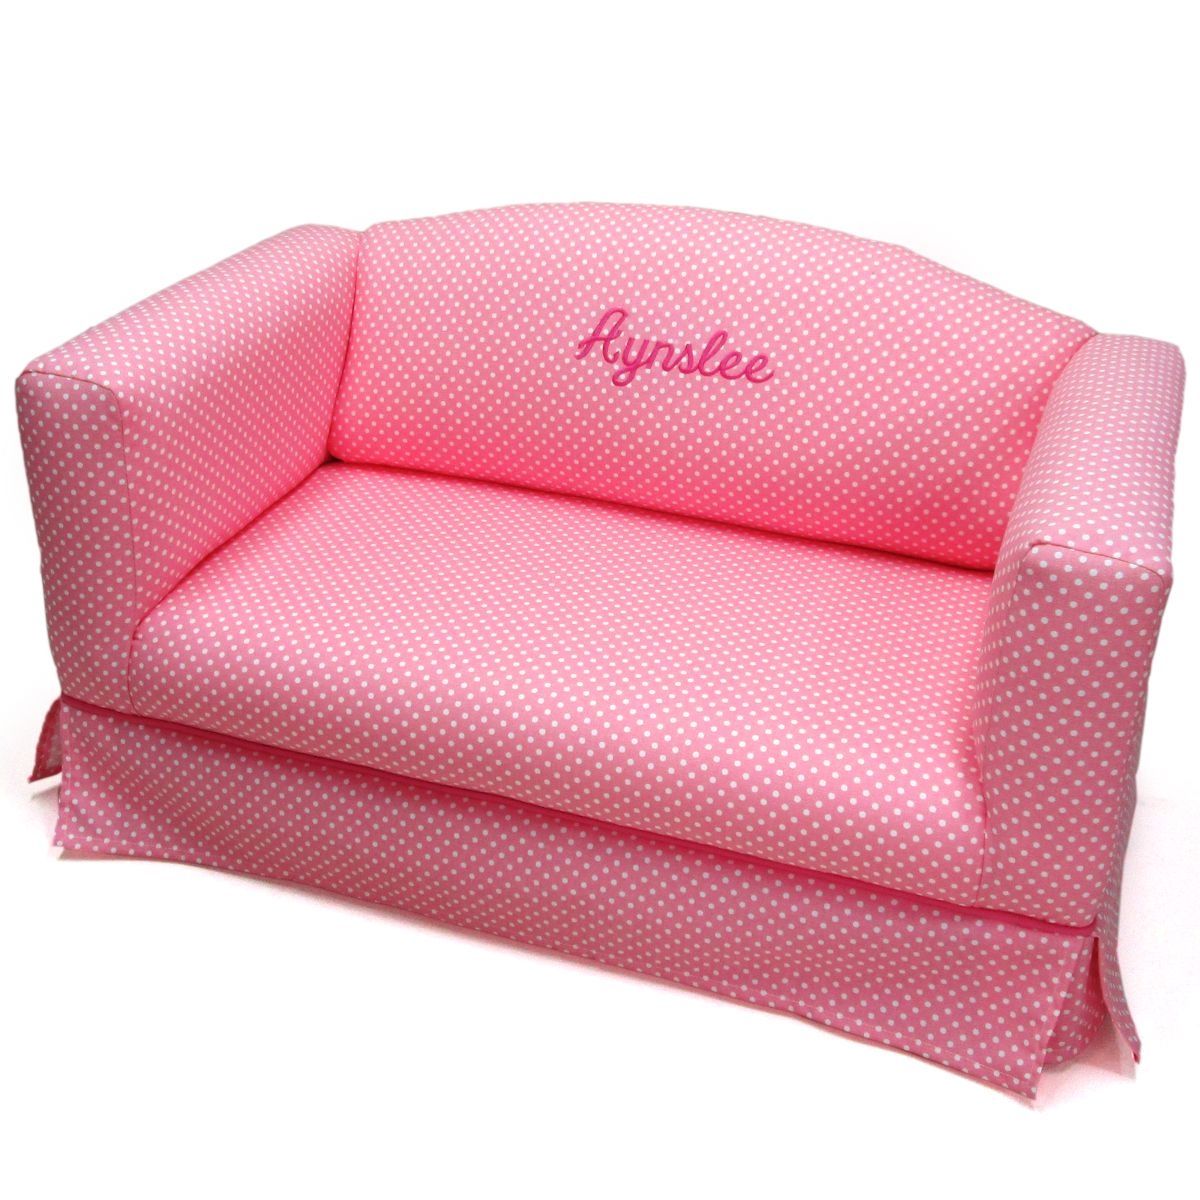 Personalized Ba Sofa Chair Hereo Sofa Regarding Personalized Kids Chairs And Sofas (View 13 of 15)